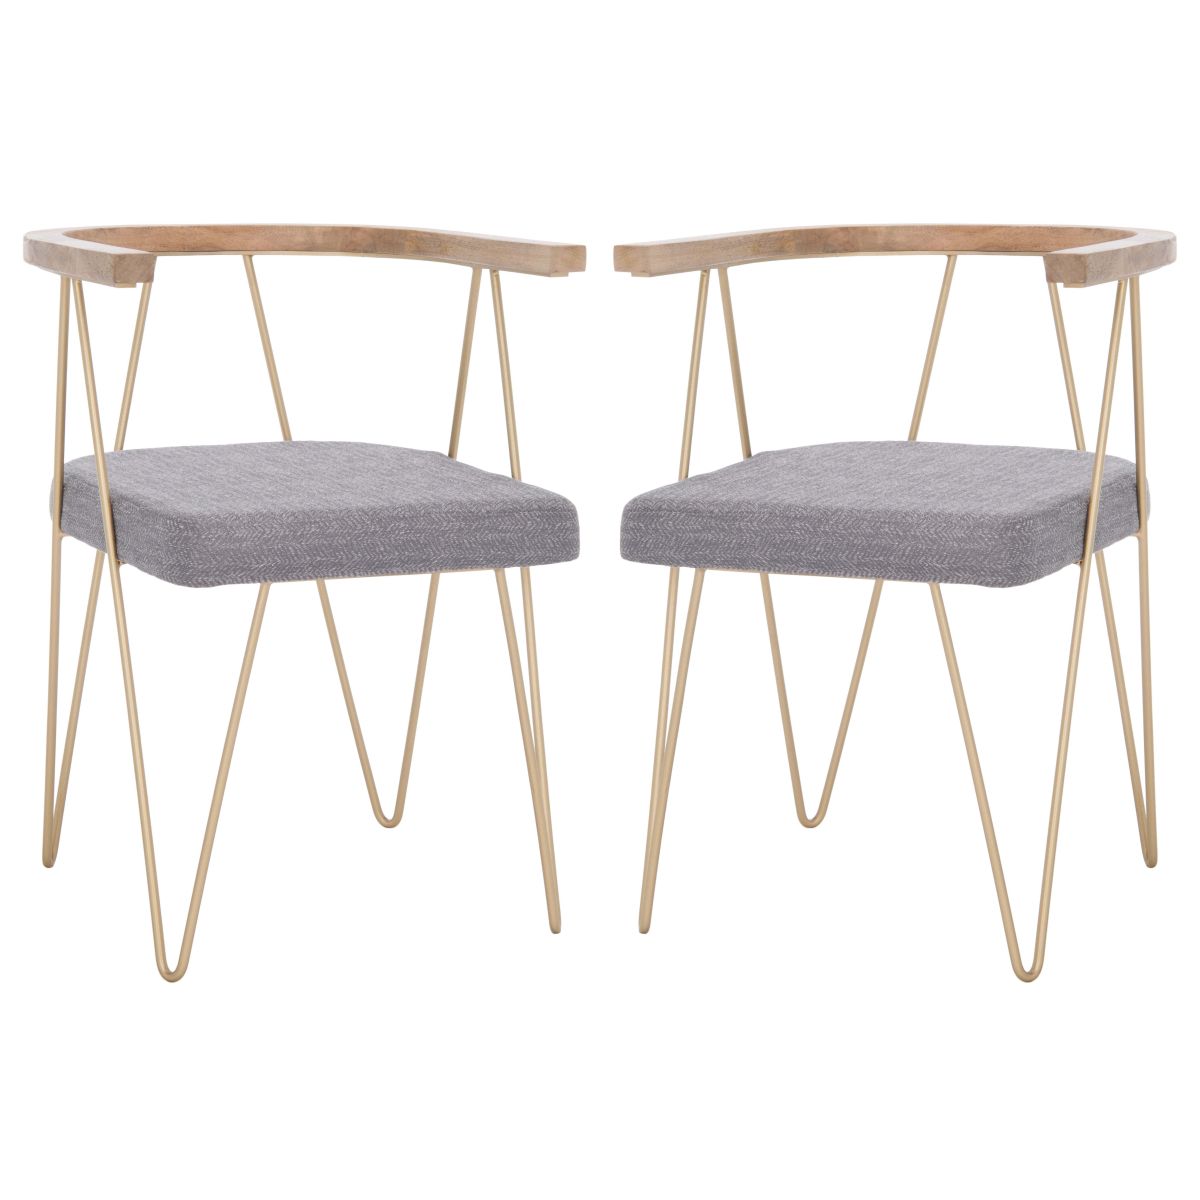 Safavieh Couture Krissy Hairpin Leg Dining Chair (Set of 2)